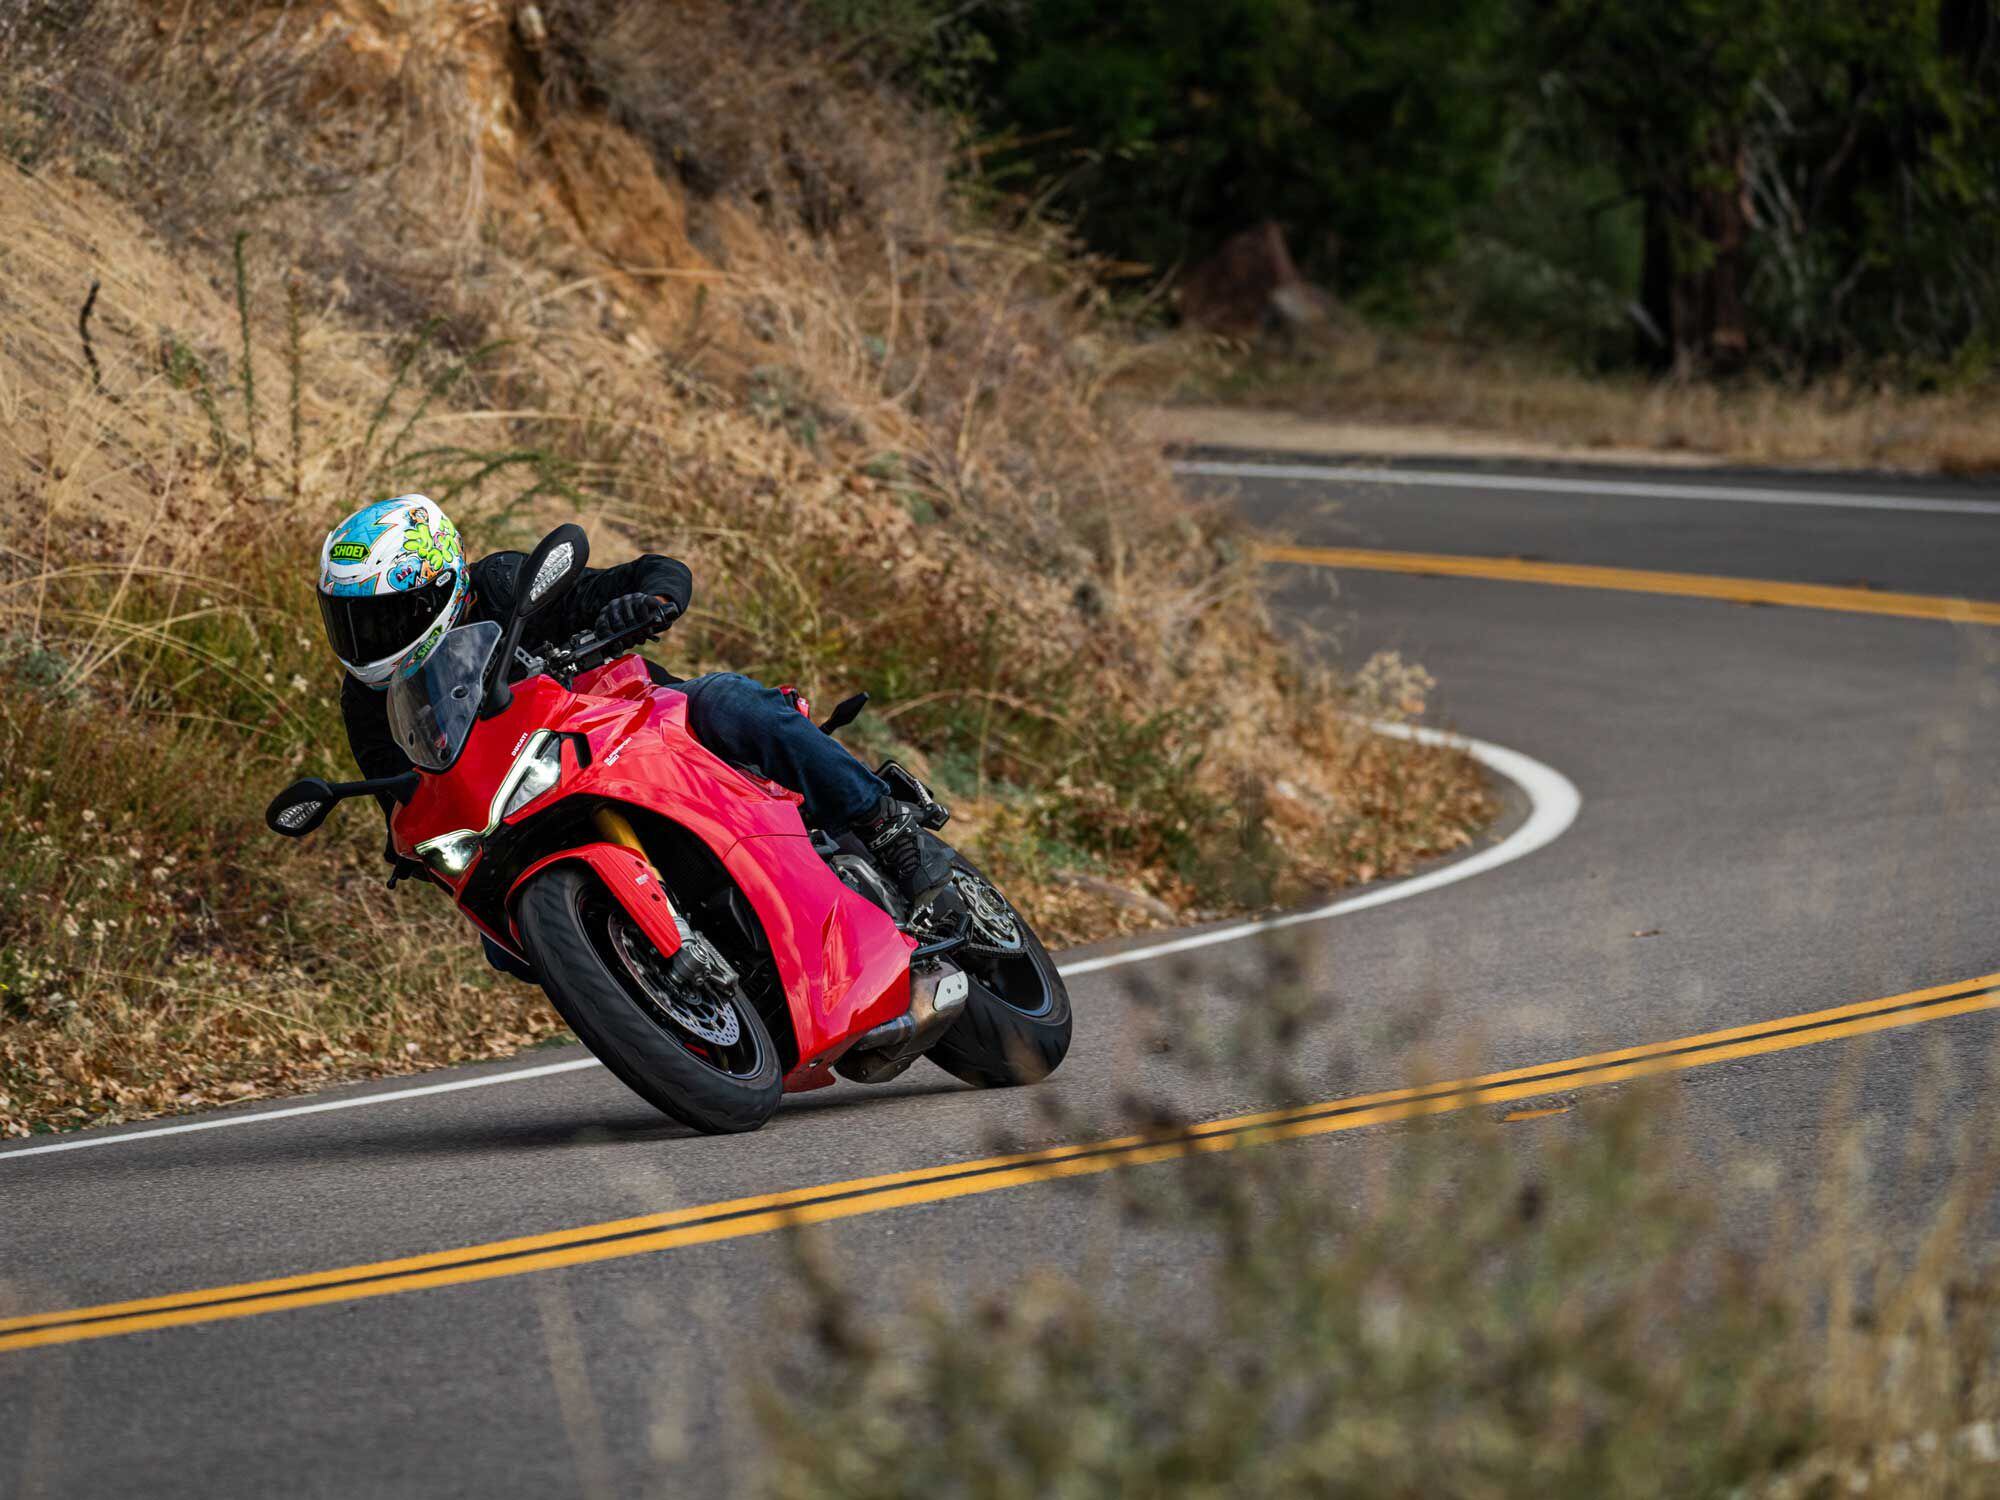 We go for a ride aboard Ducati’s comfy SuperSport 950 S ($16,395).